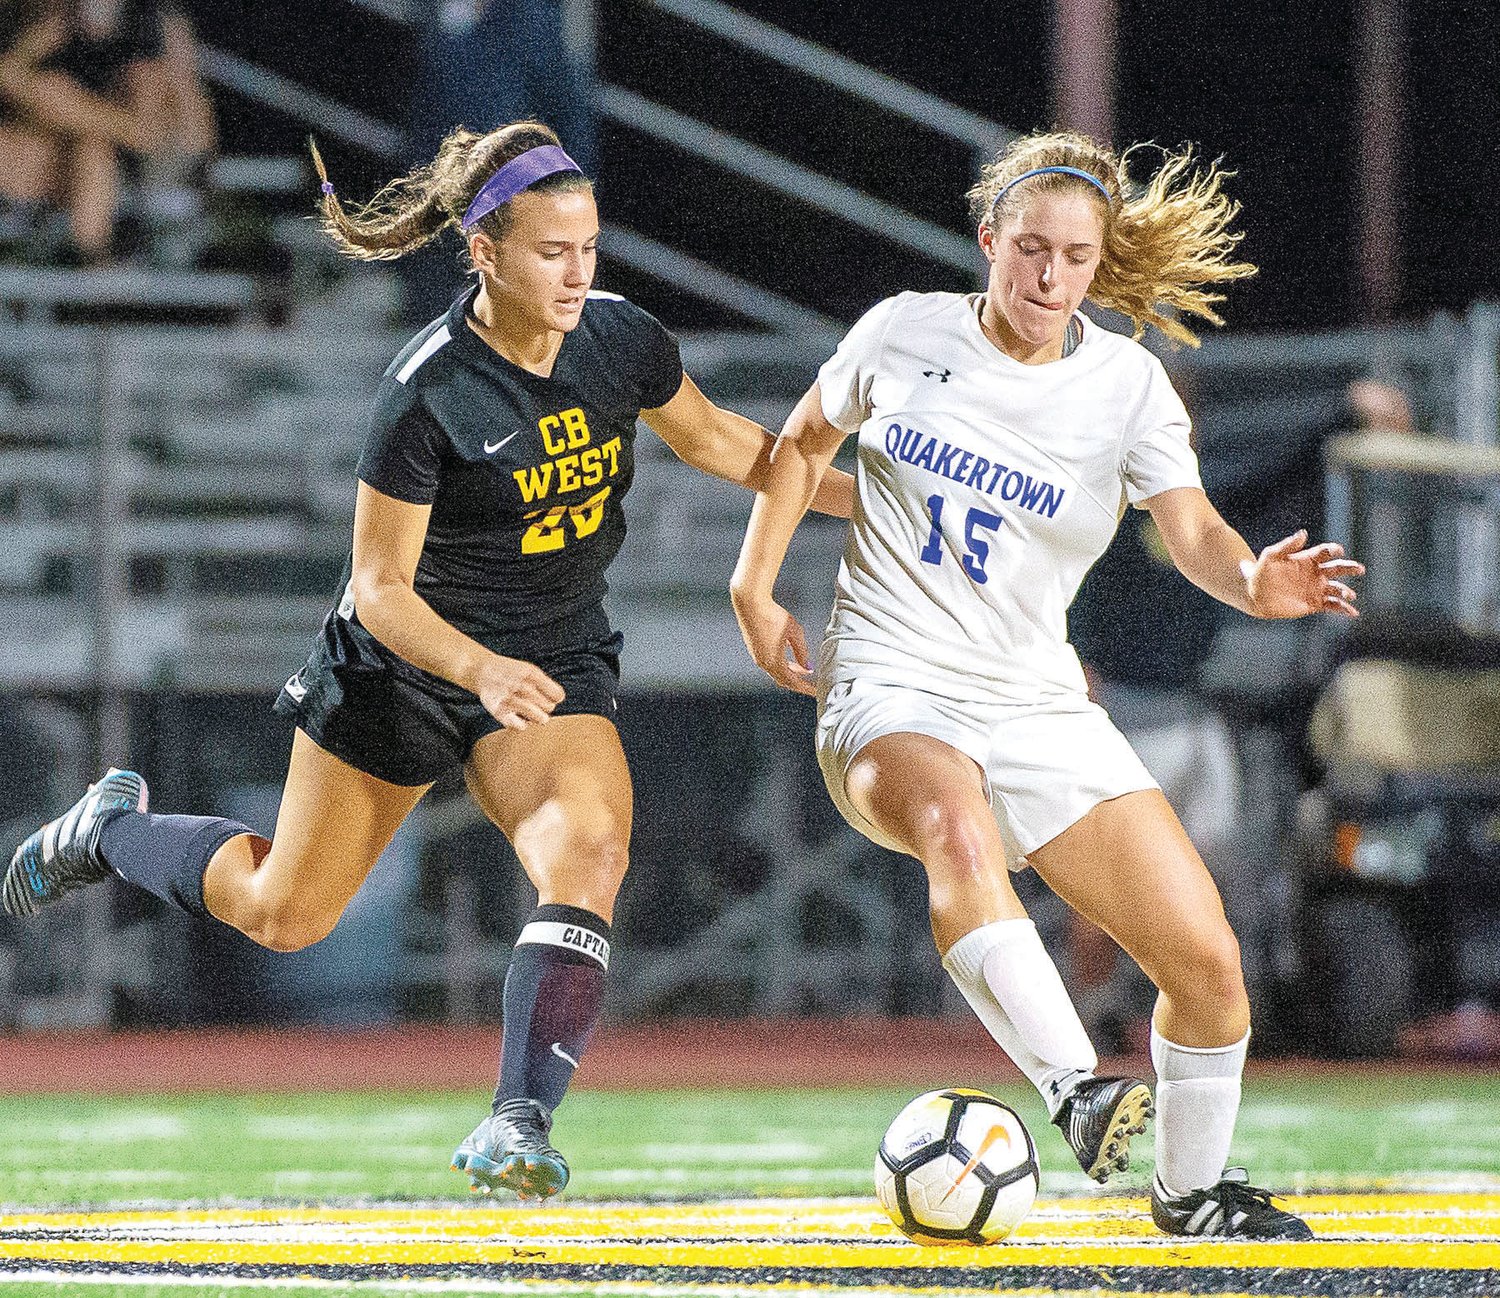 Central Bucks West senior Trish Hauck and Quakertown senior Haley Pursel, who has committed to play soccer at Lafayette next year, battle for the ball.  Photograph by Michael A. Apice